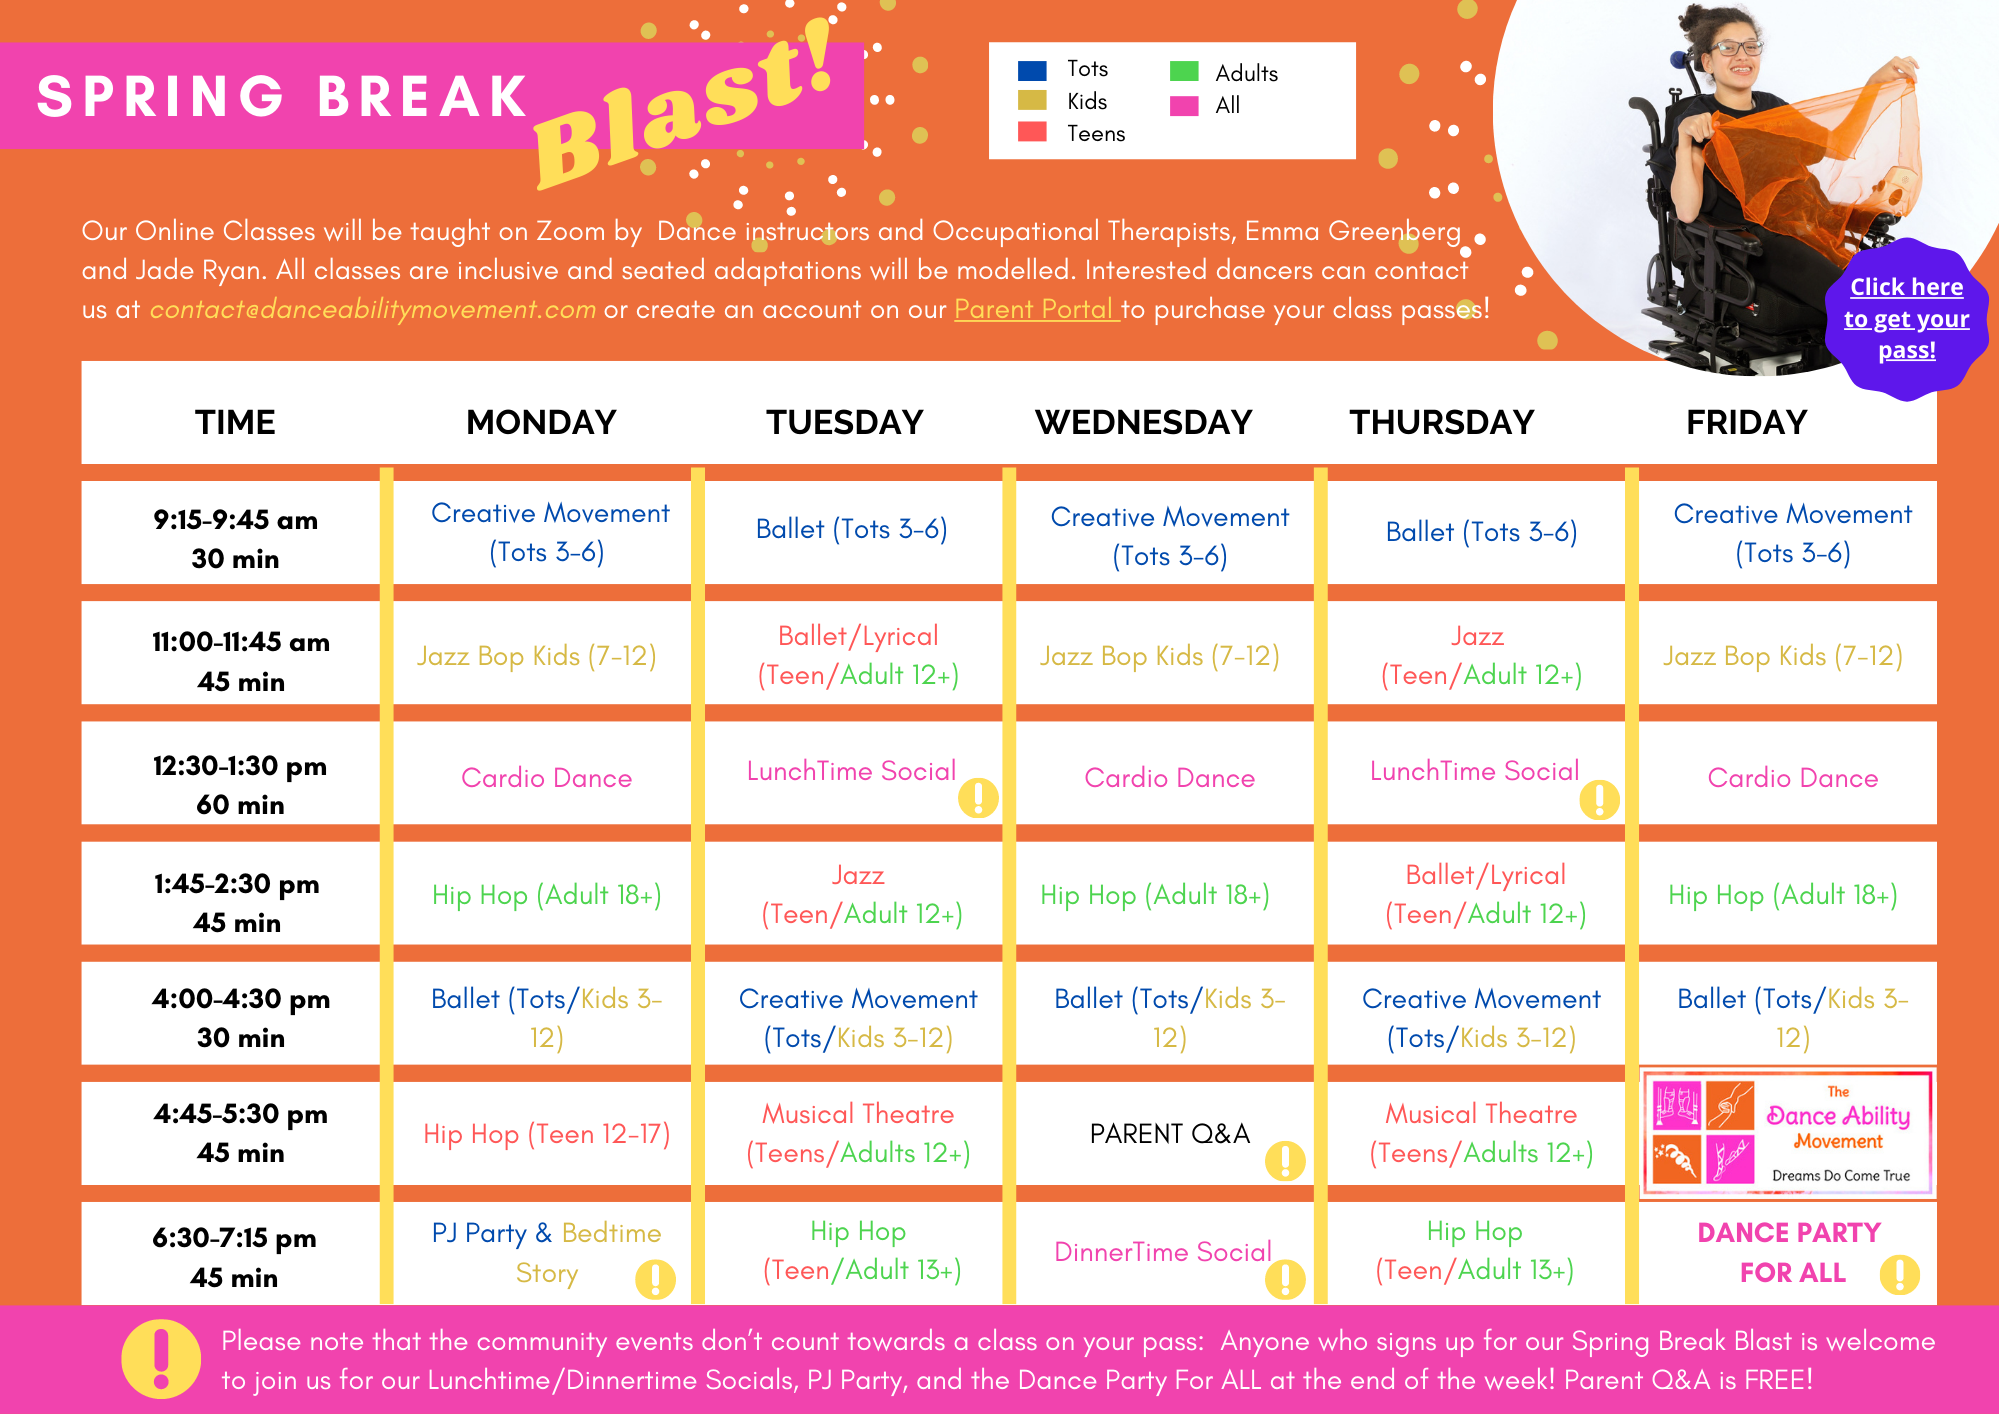 Image shows a week long calendar from Monday to Friday with all of the class offerings for March Break. Classes begin at 9:15 am and end at 7:15 pm. For specific class offerings you can call Jade at 647-825-5809 or email contact@danceabilitymovement.com.